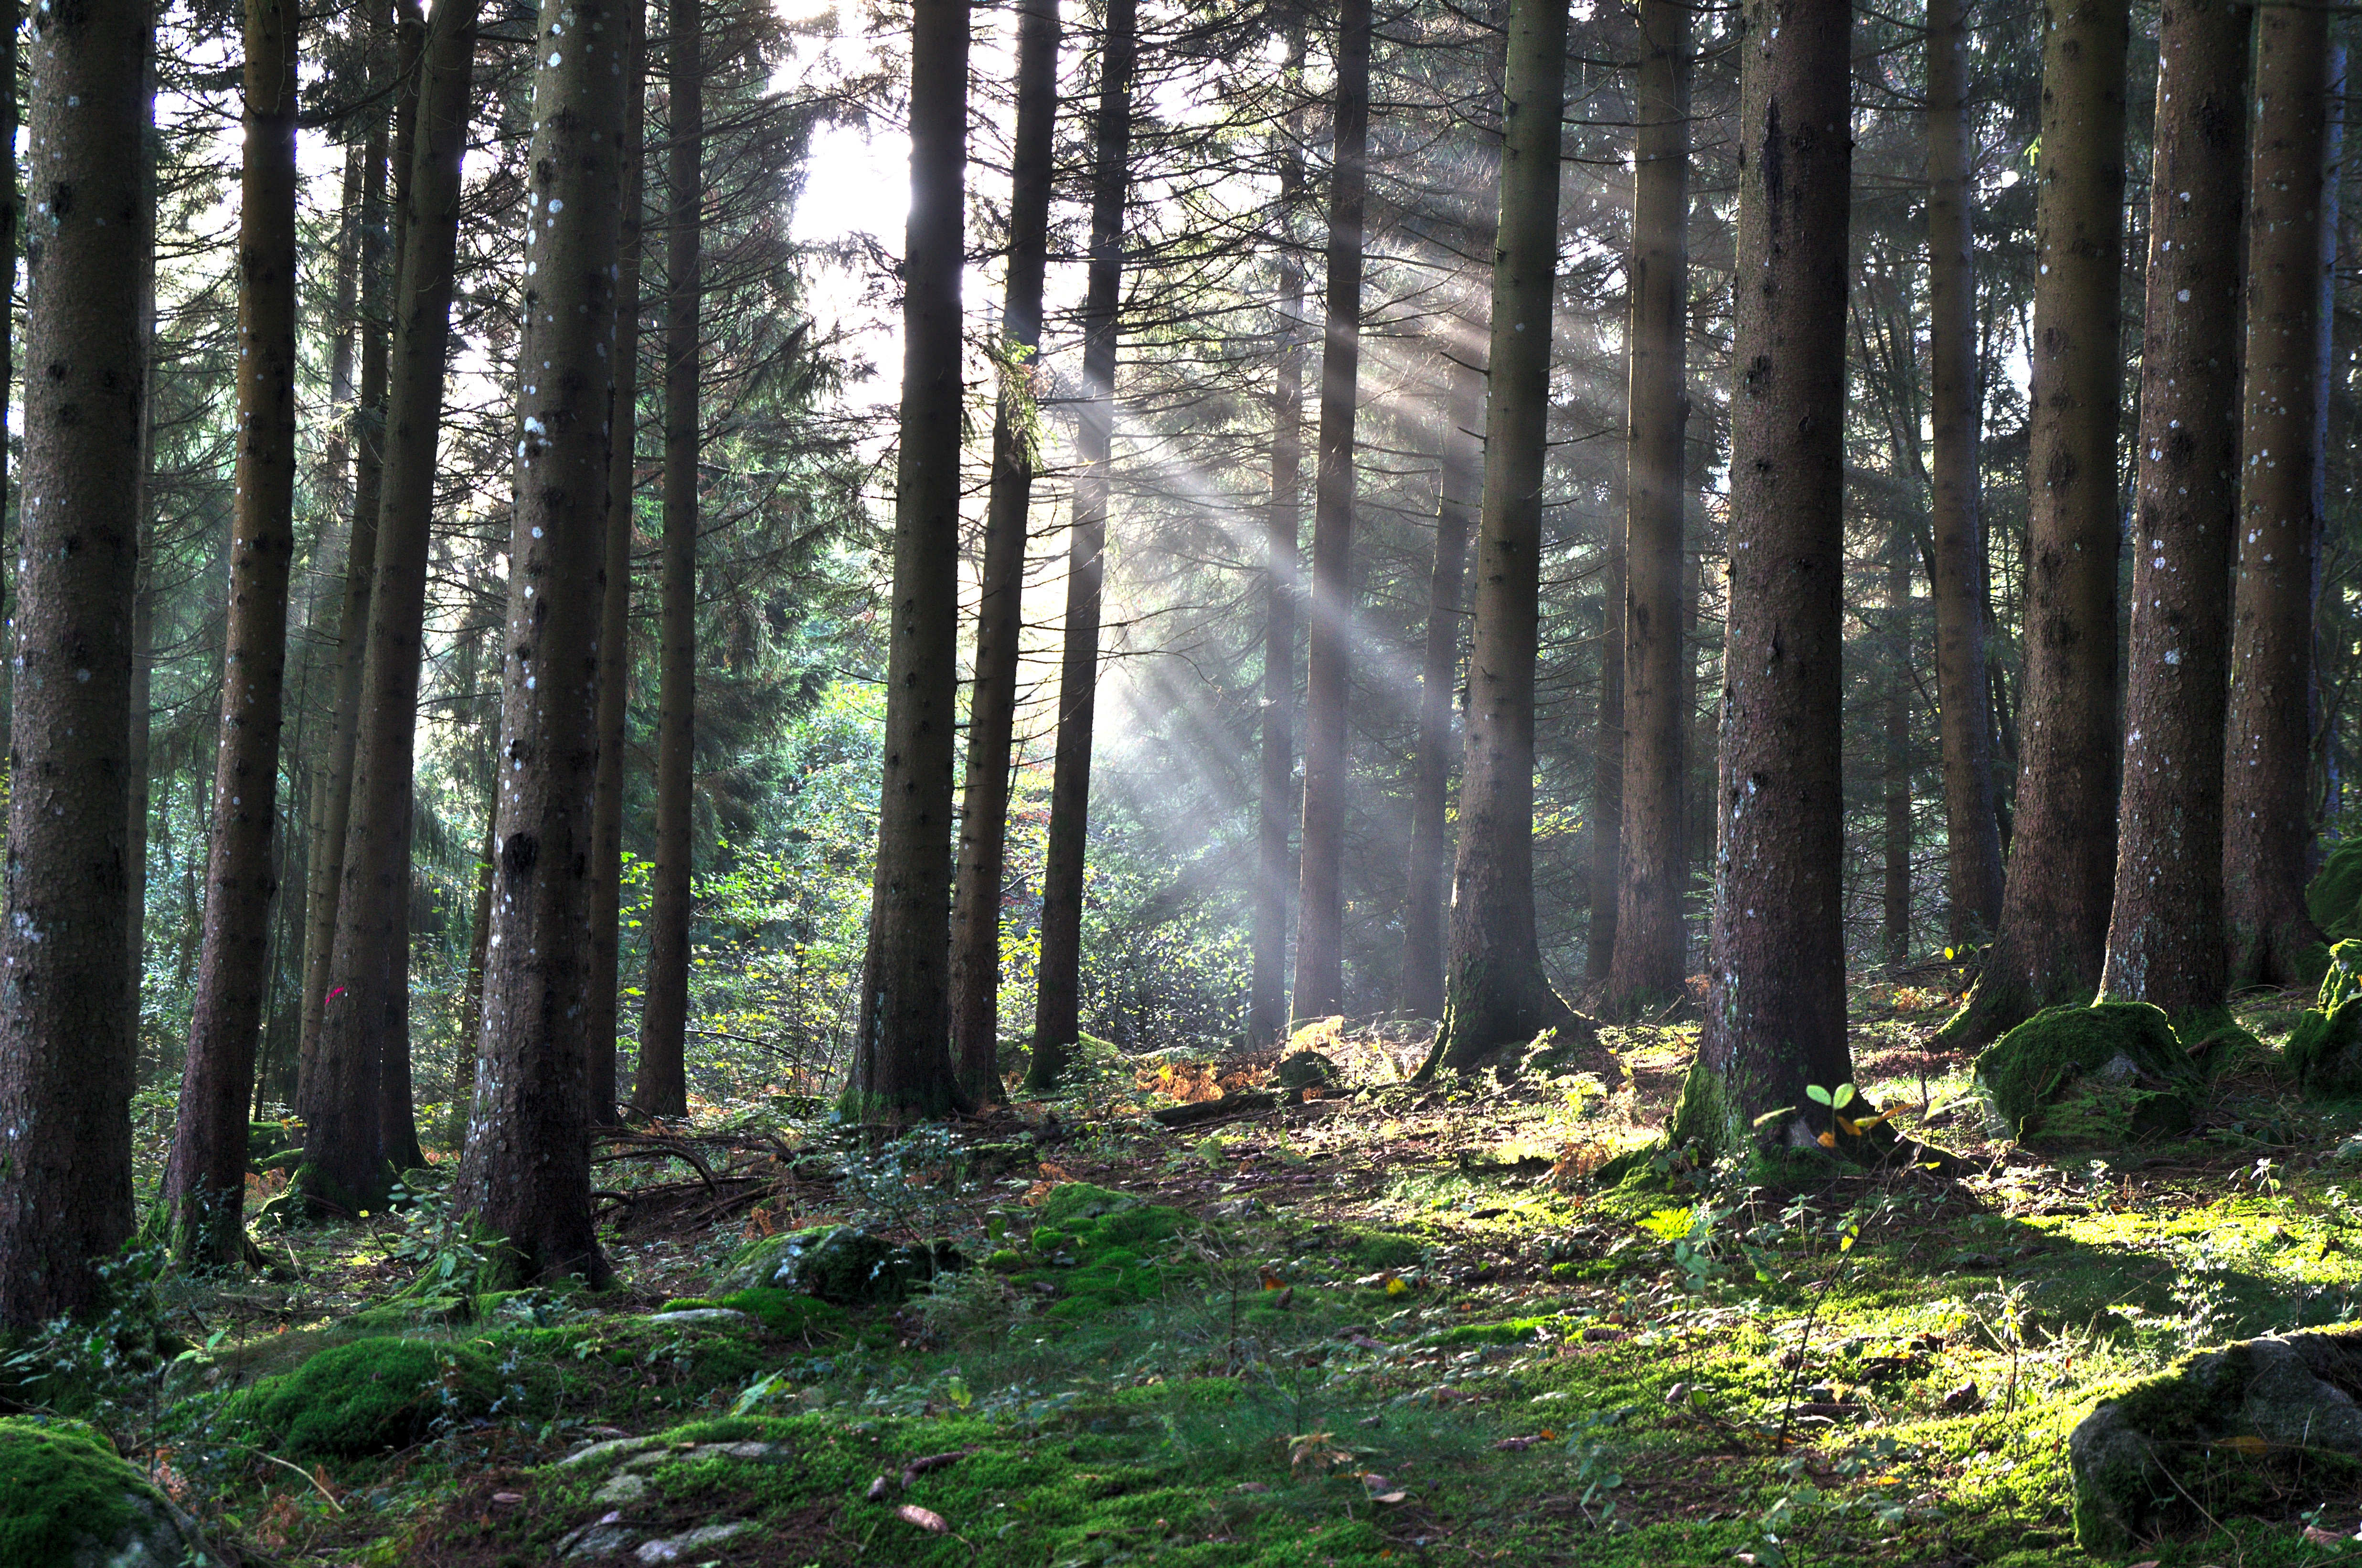 The sun`s rays break through the trees of the forest